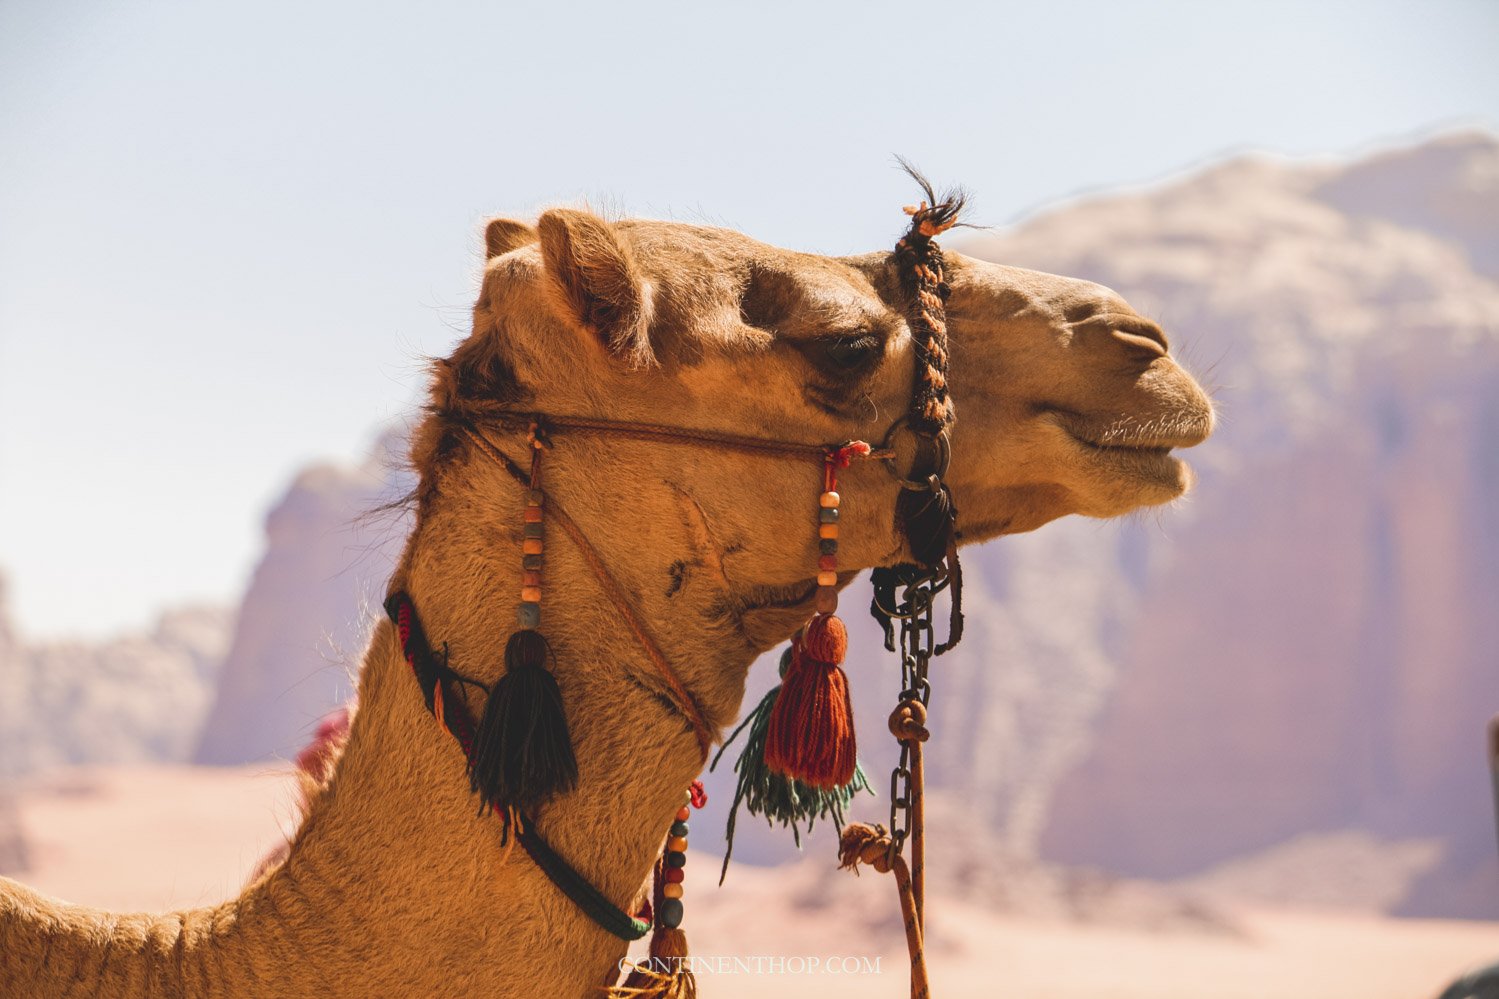 What to do in Jordan see a Camel in Wadi Rum